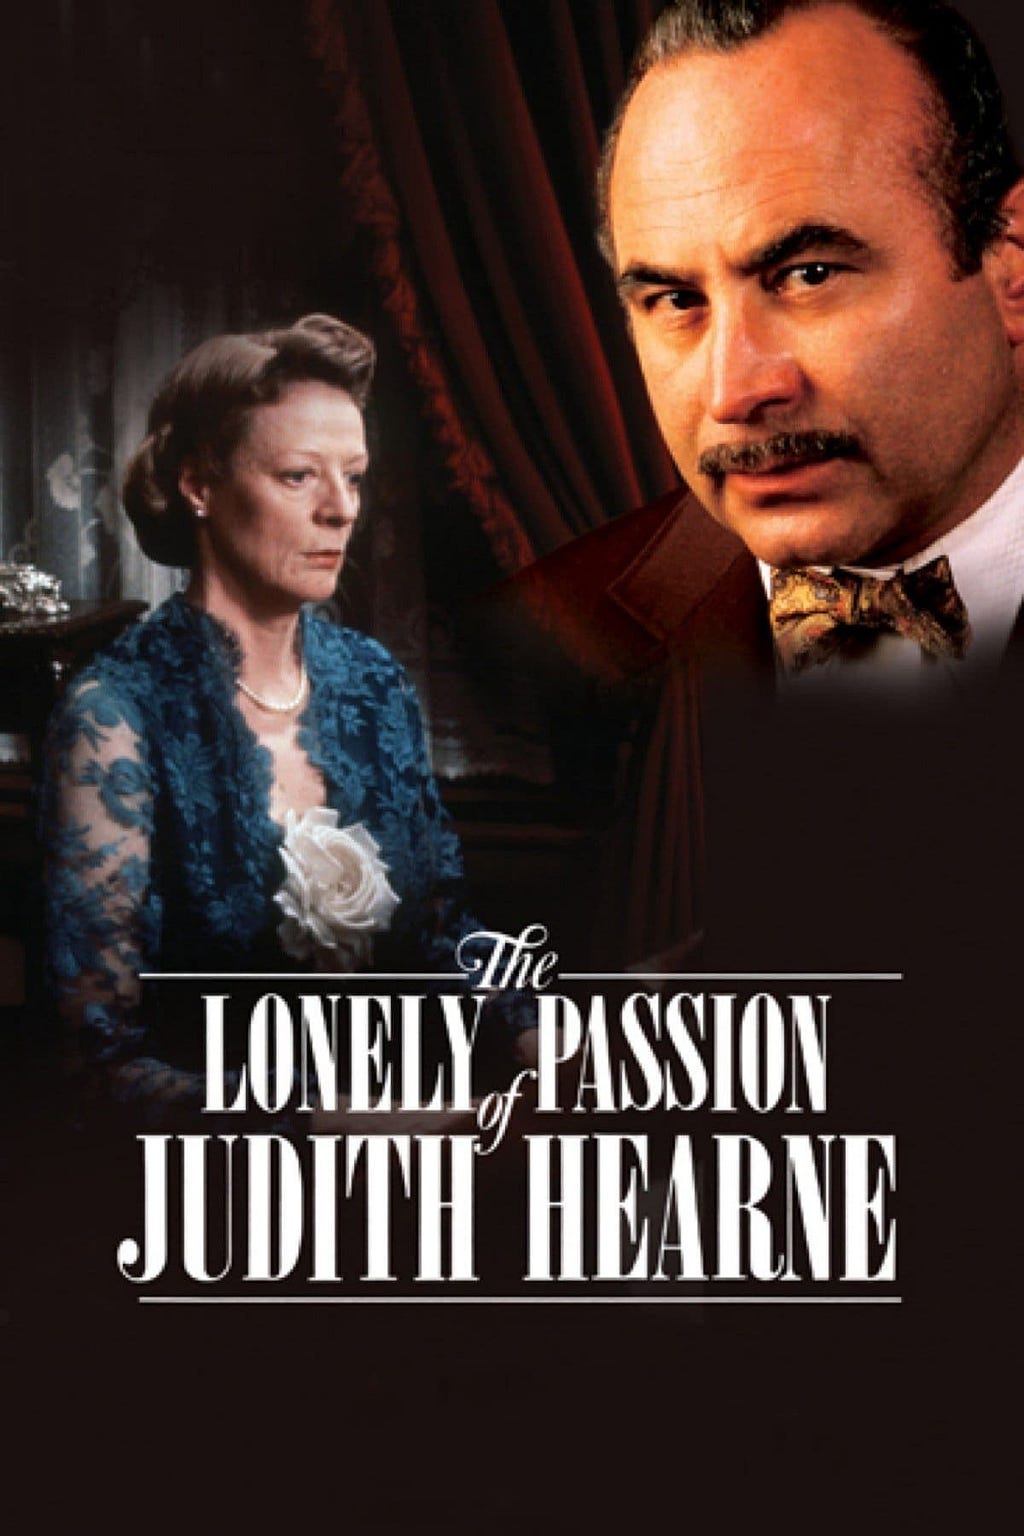 The Lonely Passion of Judith Hearne (1987) | Poster